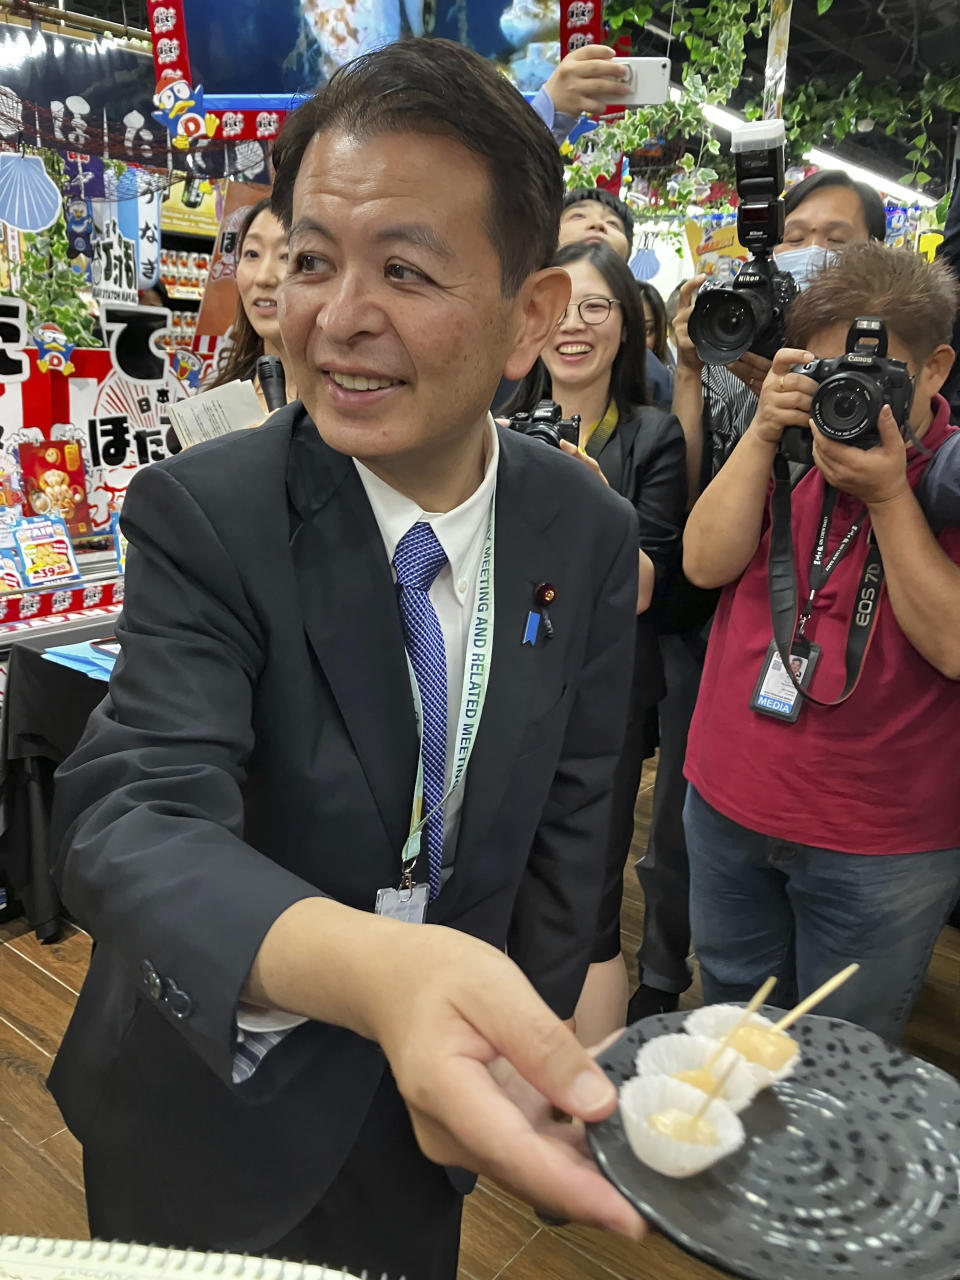 Japanese Agriculture Minister Ichiro Miyashita attends an event at Japanese store, Don Don Donki in Kuala Lumpur Wednesday, Oct. 4, 2023 to promote the safety and deliciousness of Japanese scallops to shoppers. Japan hopes to resolve the issue of China's ban on its seafood within the scope of the World Trade Organization ambit and will hold food fairs overseas to bolster seafood exports amid safety concerns over the release of treated water from the Fukushima Daiichi nuclear plant, Miyashita said Wednesday. (AP Photo/Eileen Ng)